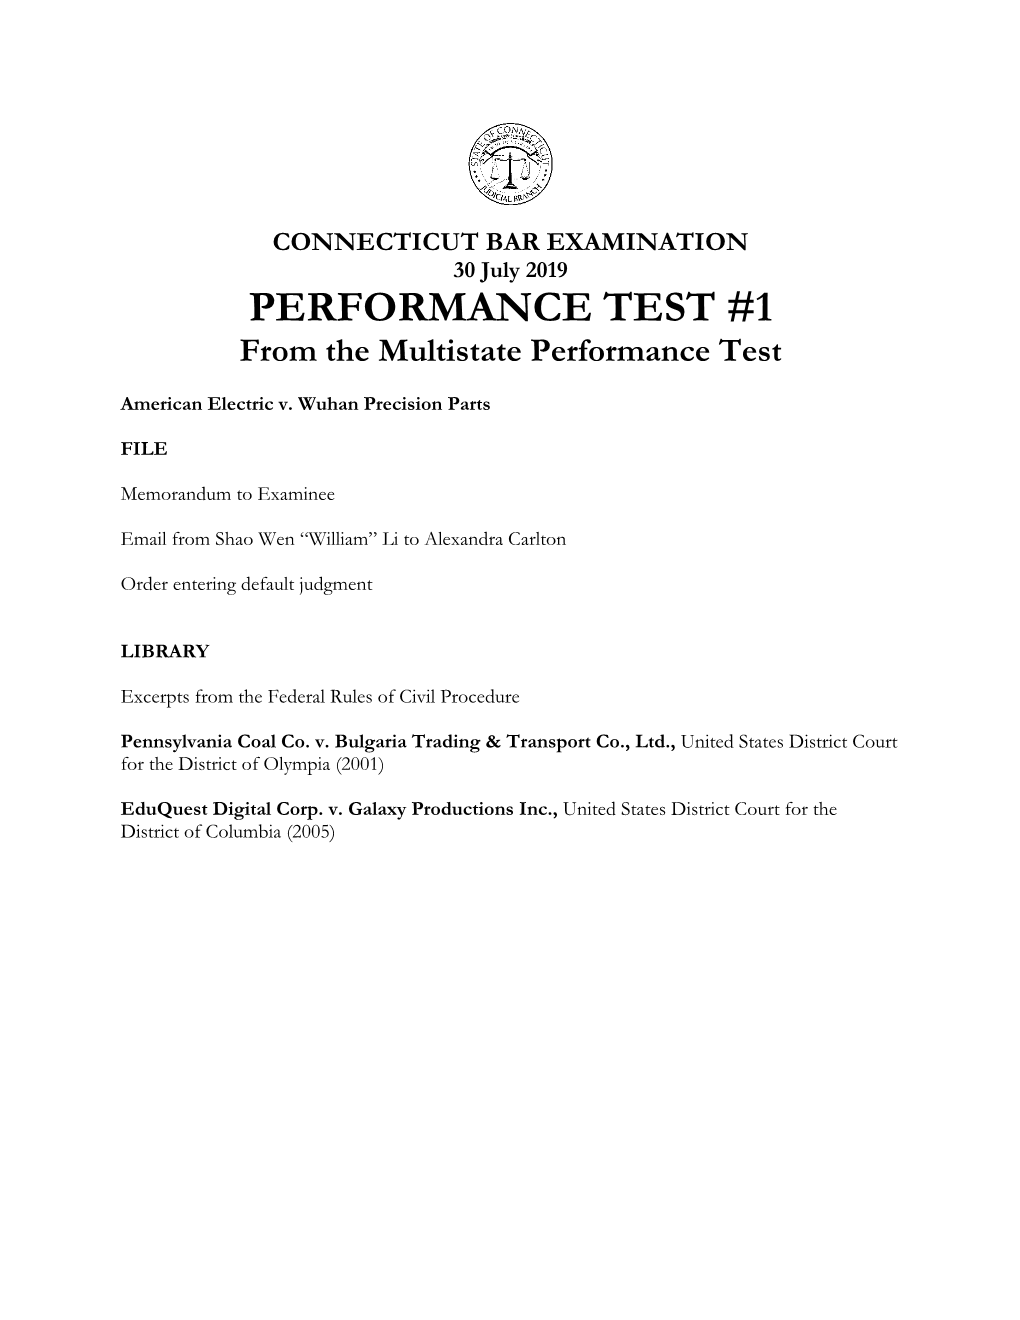 July 2019 PERFORMANCE TEST #1 from the Multistate Performance Test